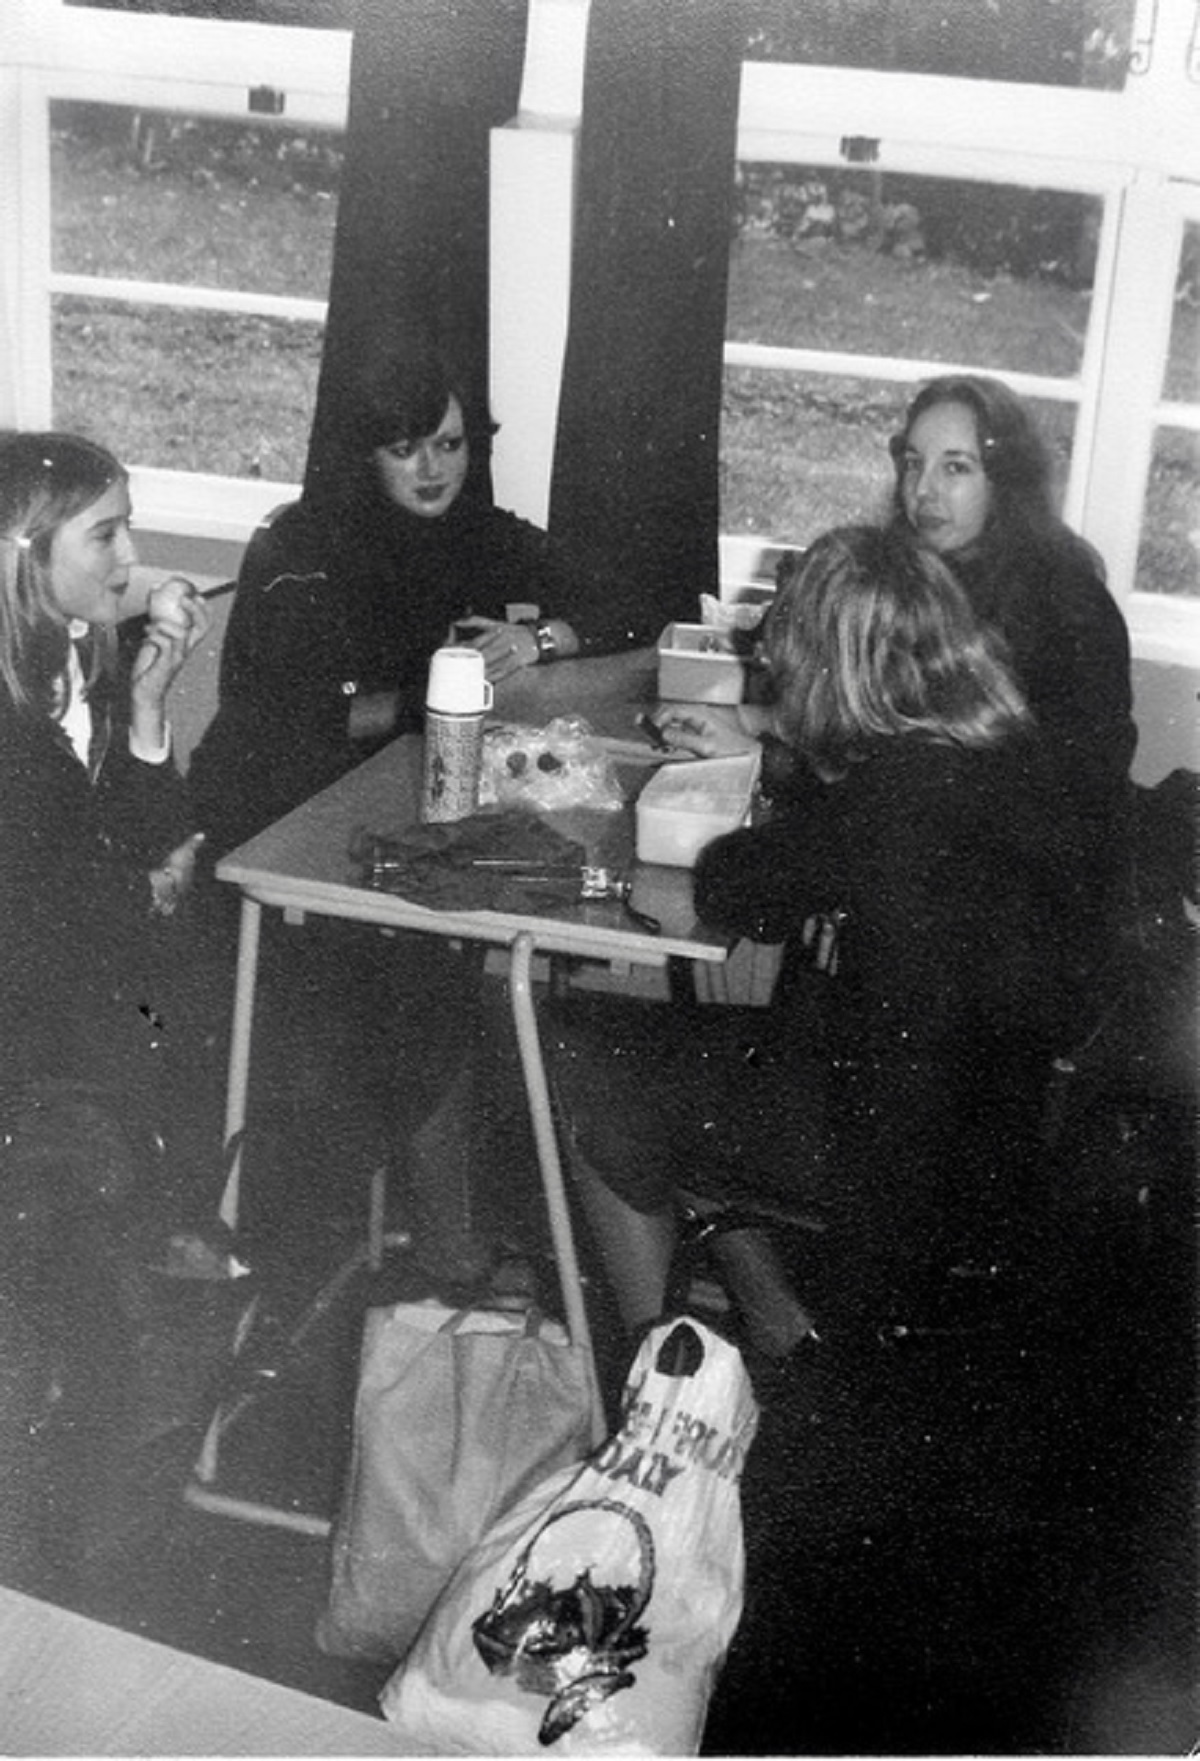 Lunch break - this picture was taken in the 1970s